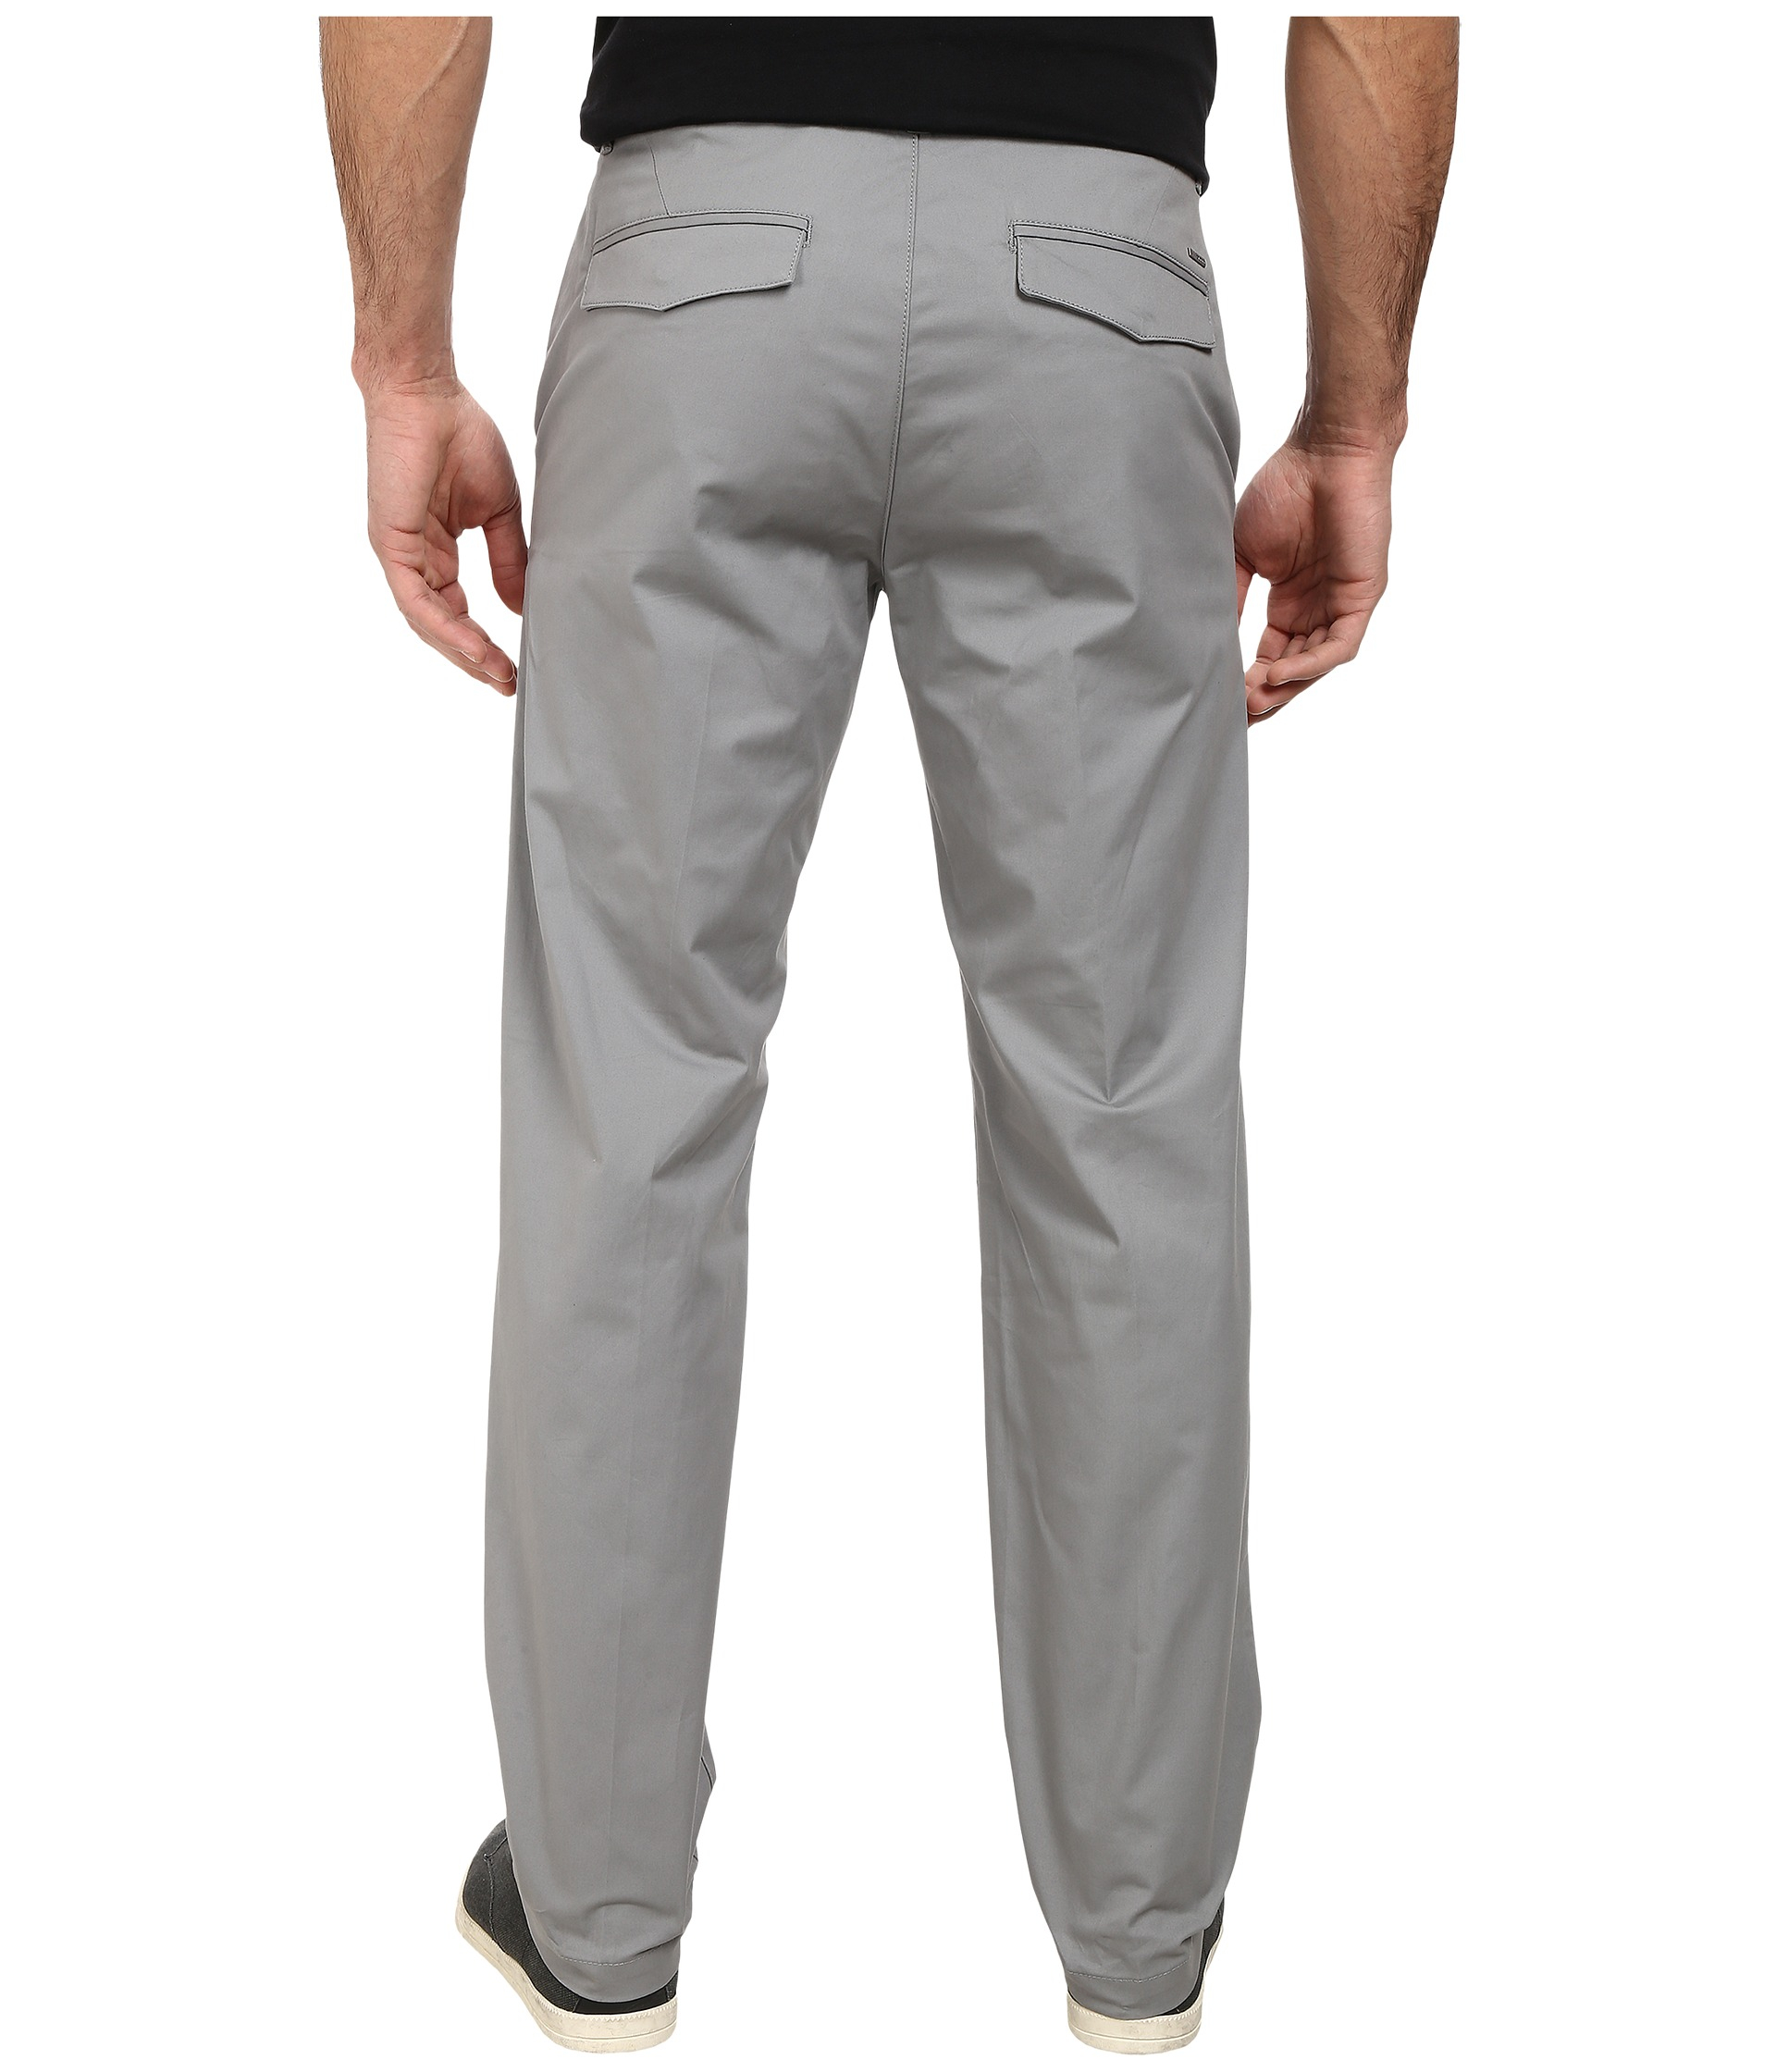 Lyst - Calvin Klein Sateen Chino Pants in Gray for Men